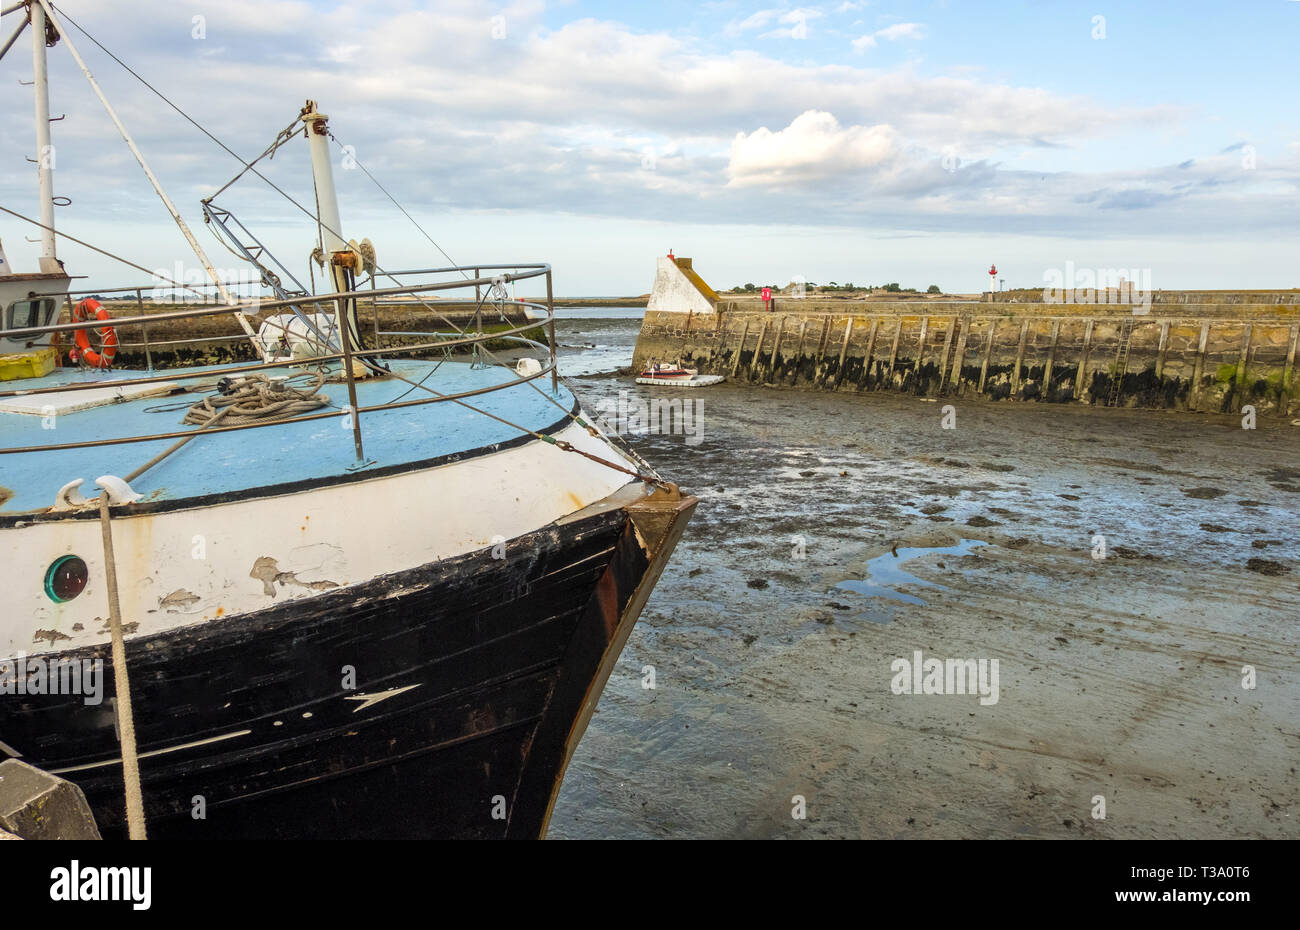 Saint-Vaast-la-Hougue, France - August 29, 2018: A fishing boat in the port of Saint-Vaast-la-Hougue at low tide . Normandy, France Stock Photo